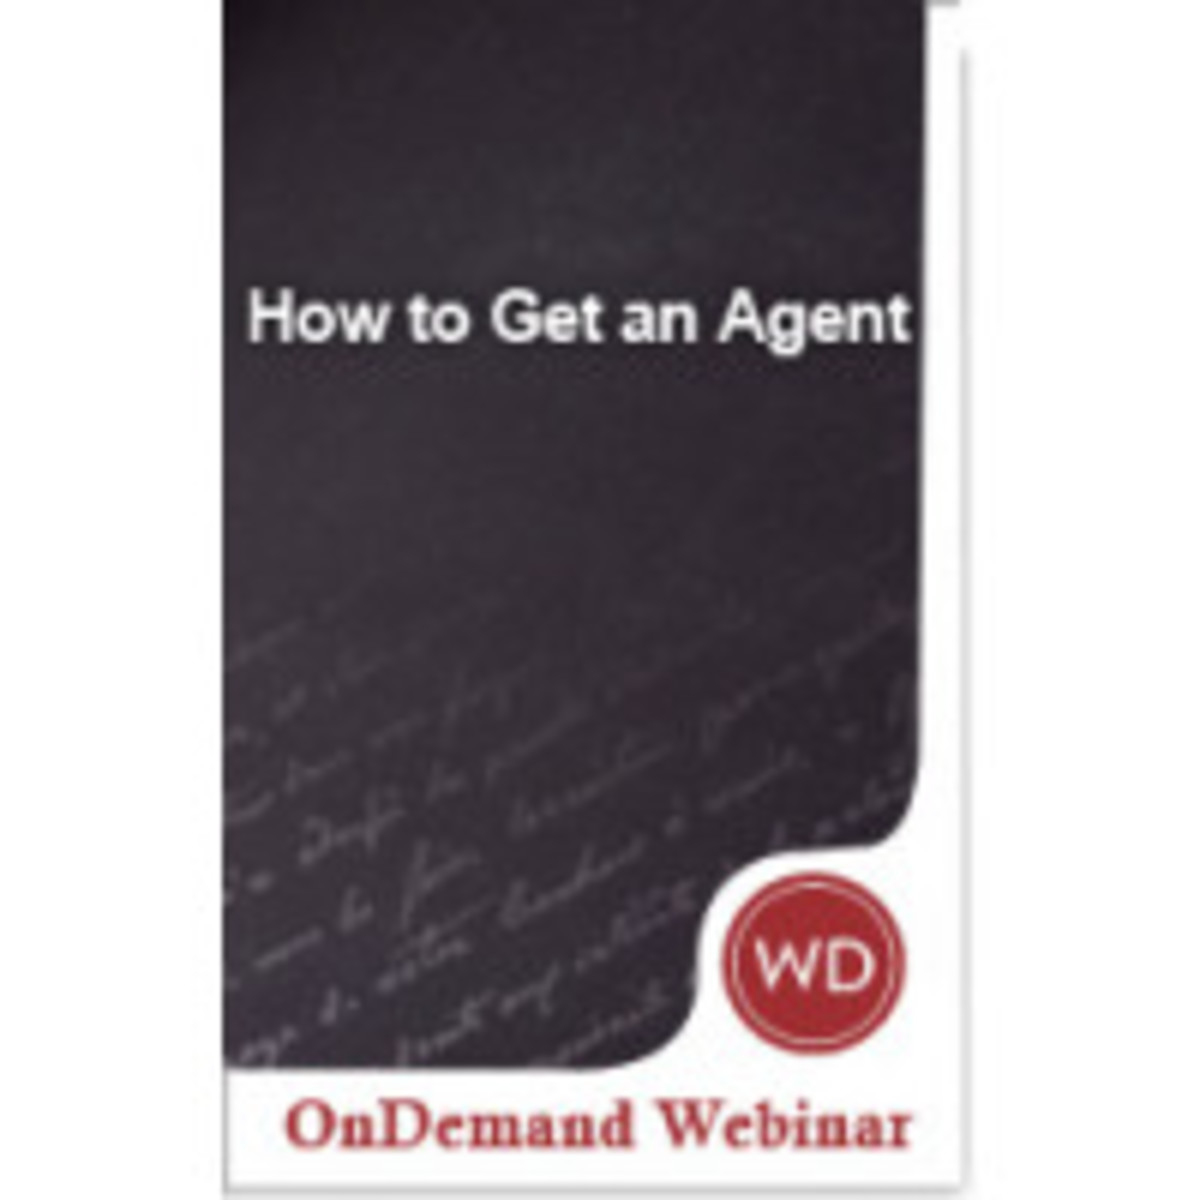 How to Get an Agent